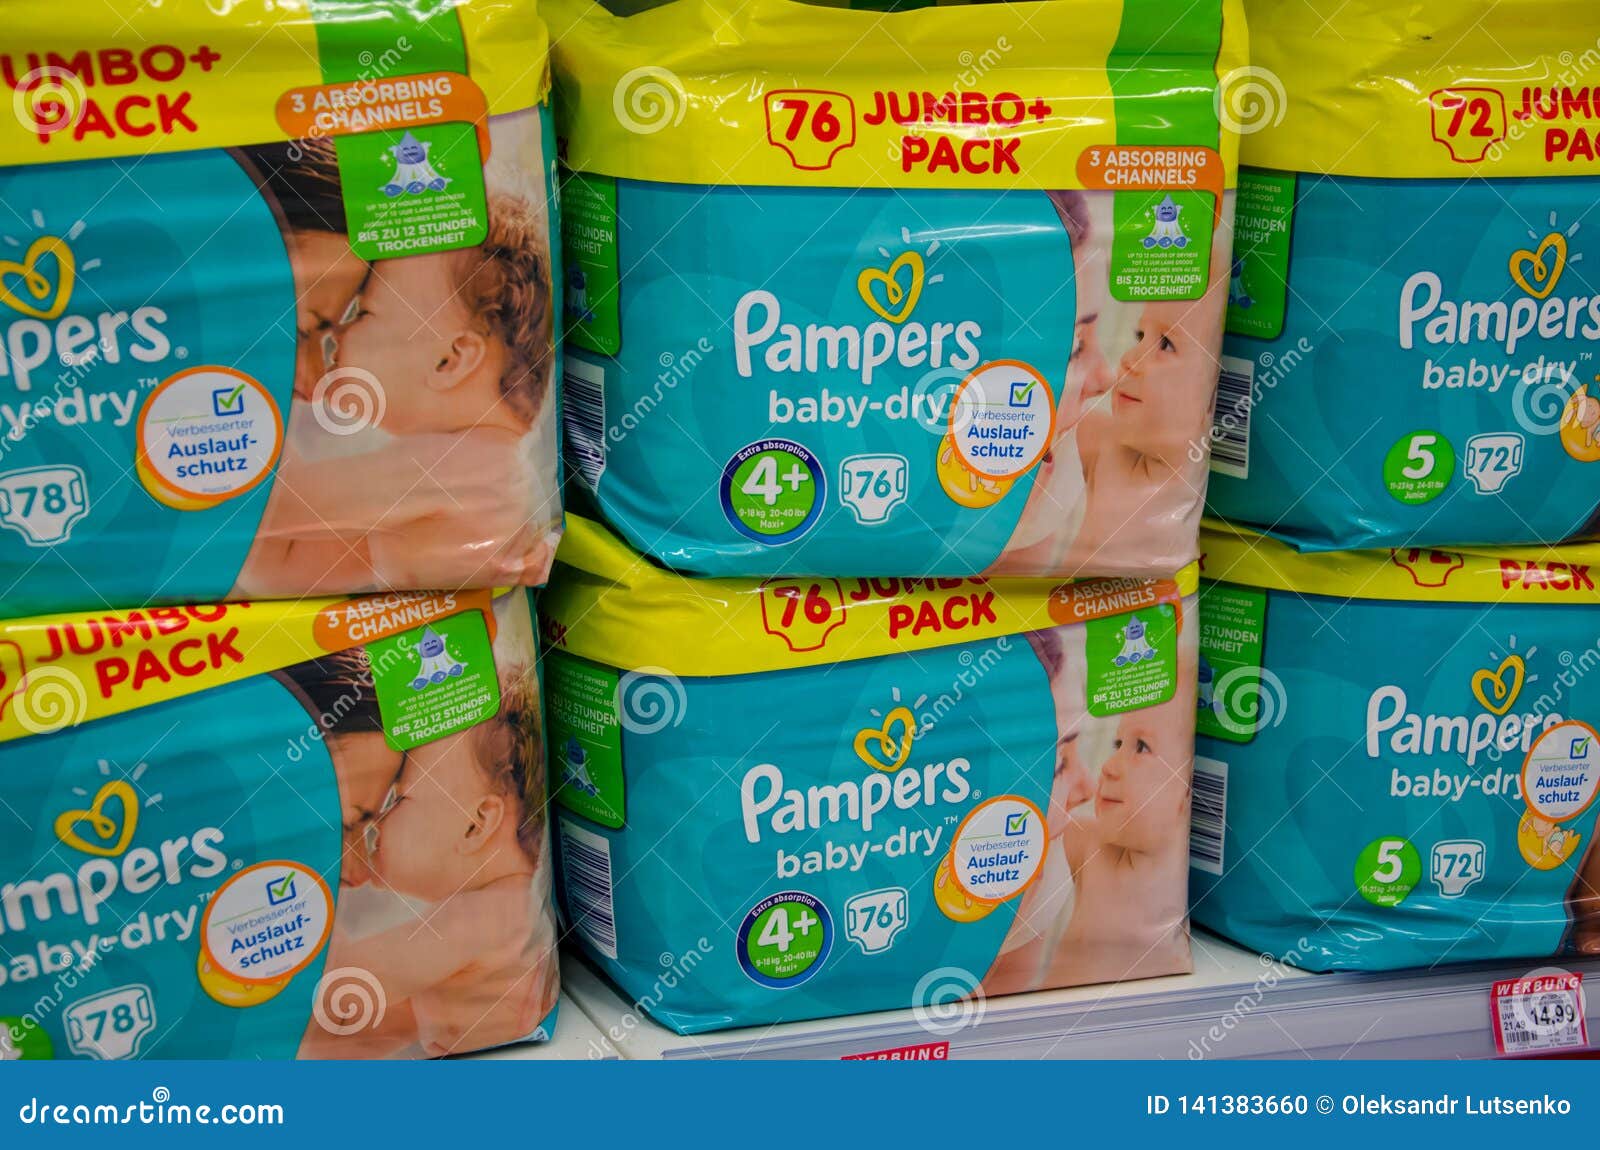 pampers rossma